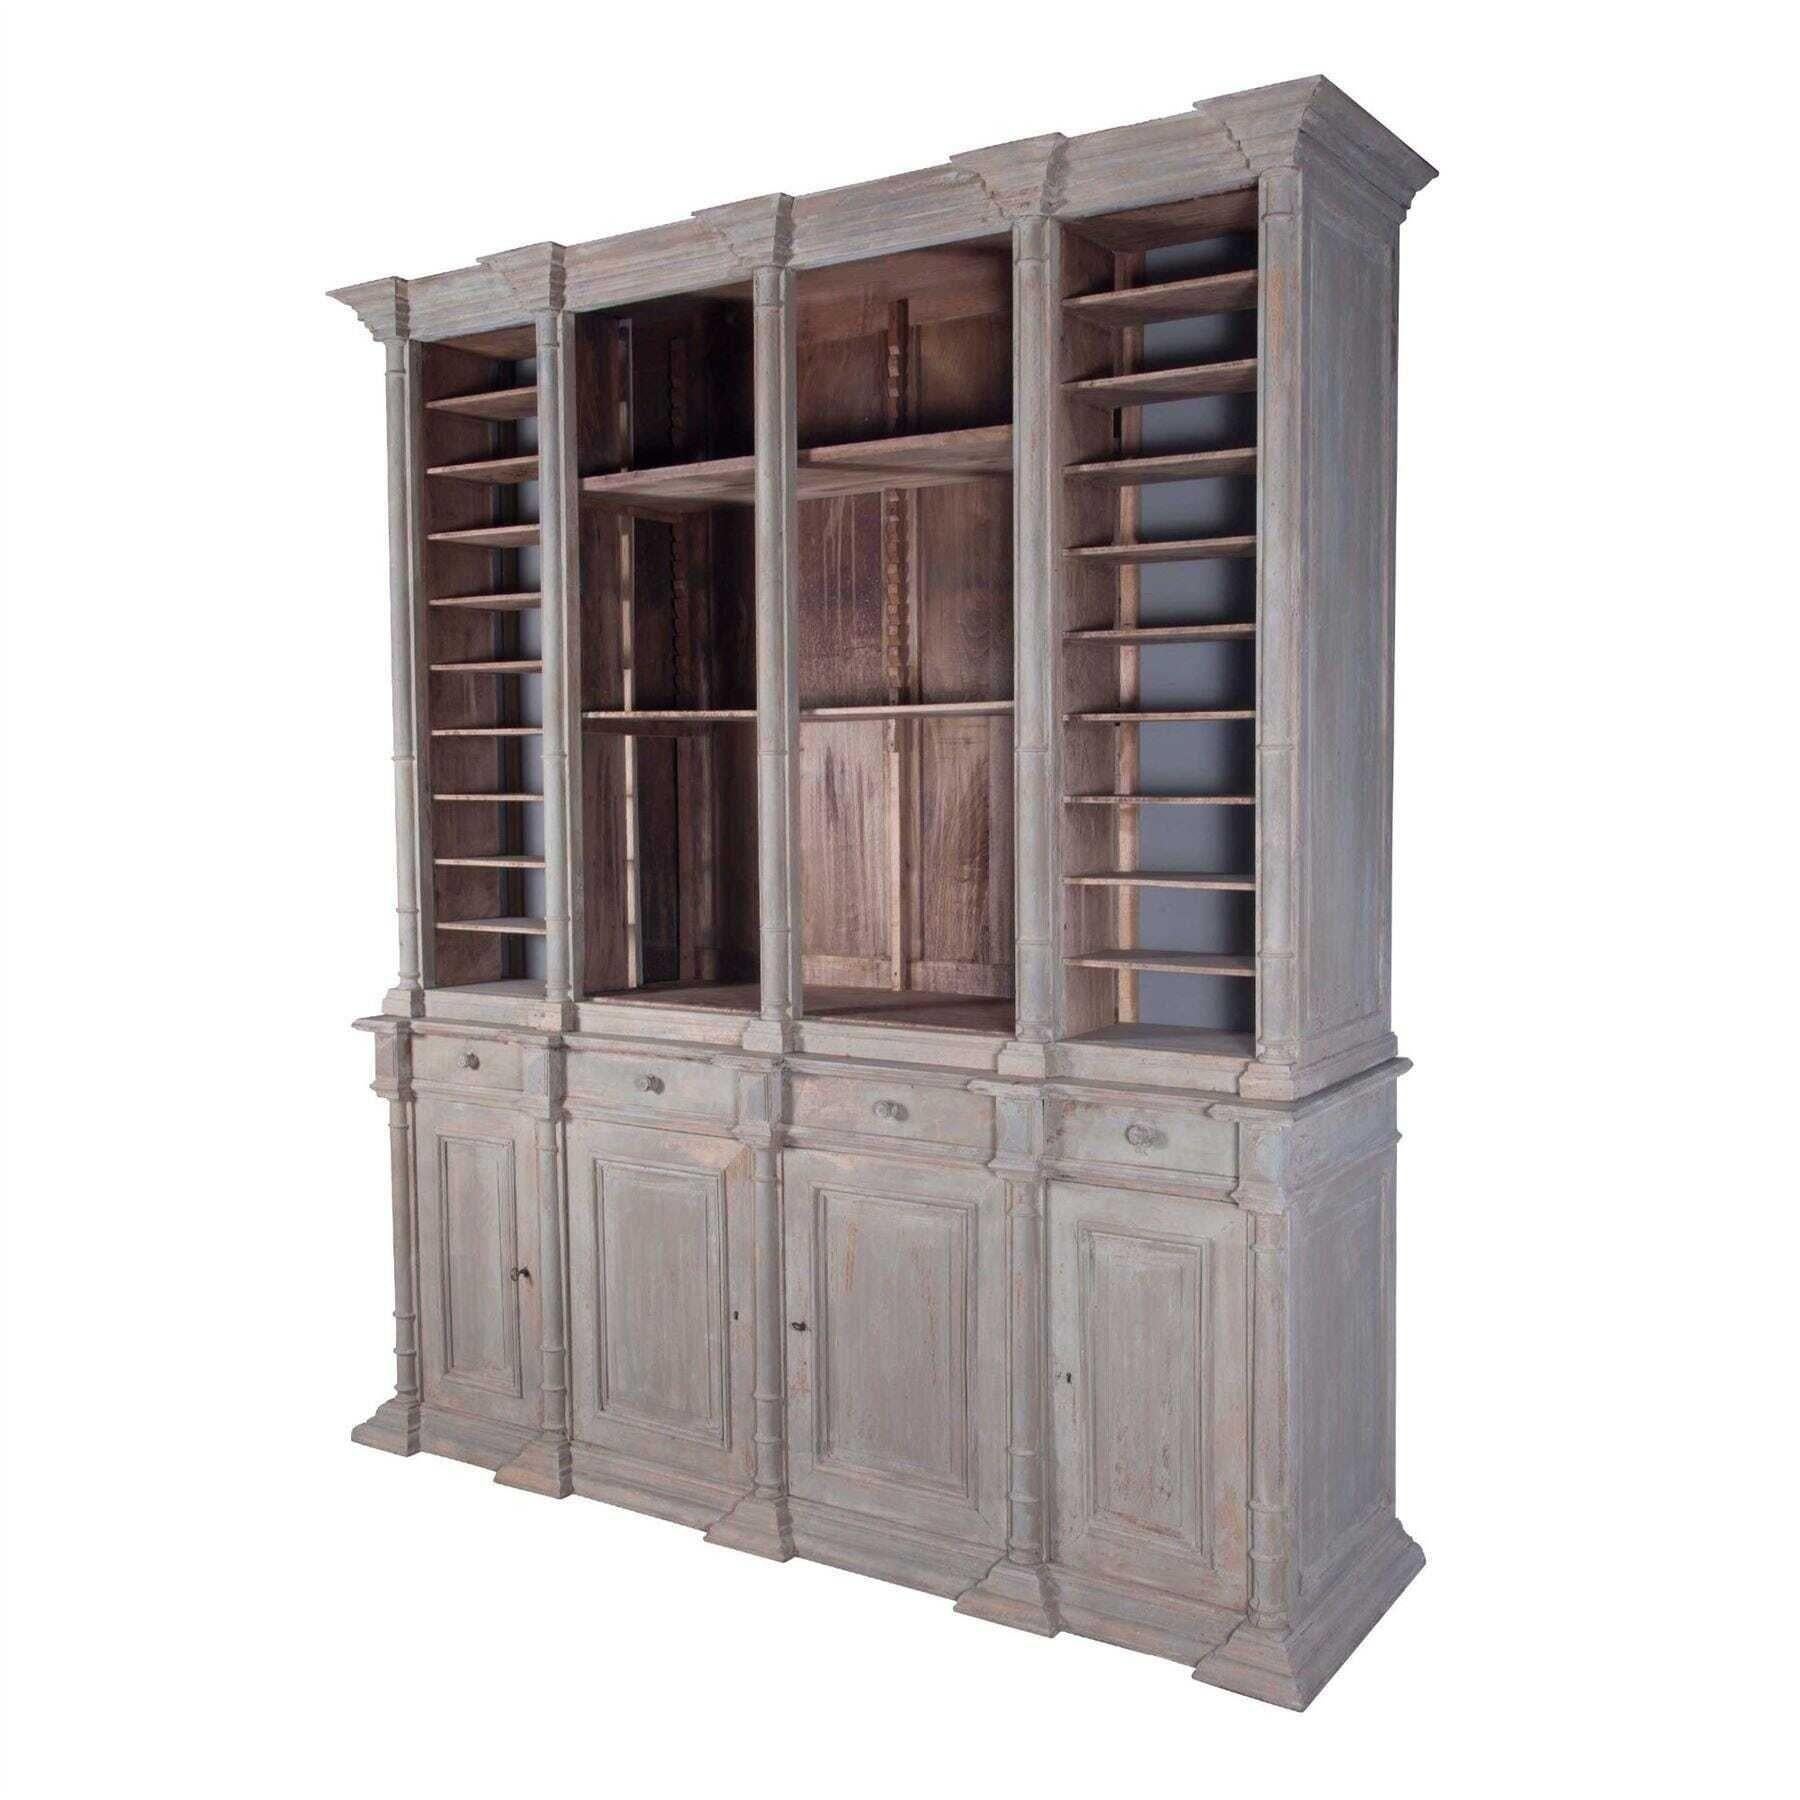 Fabulous 19th century bibliothèque cupboard, from a French notaire's office. 
This fantastic cupboard is in its original condition and has a grand architectural form. The top section offers an arrangement of open shelves. Slim pigeon-hole shelves,